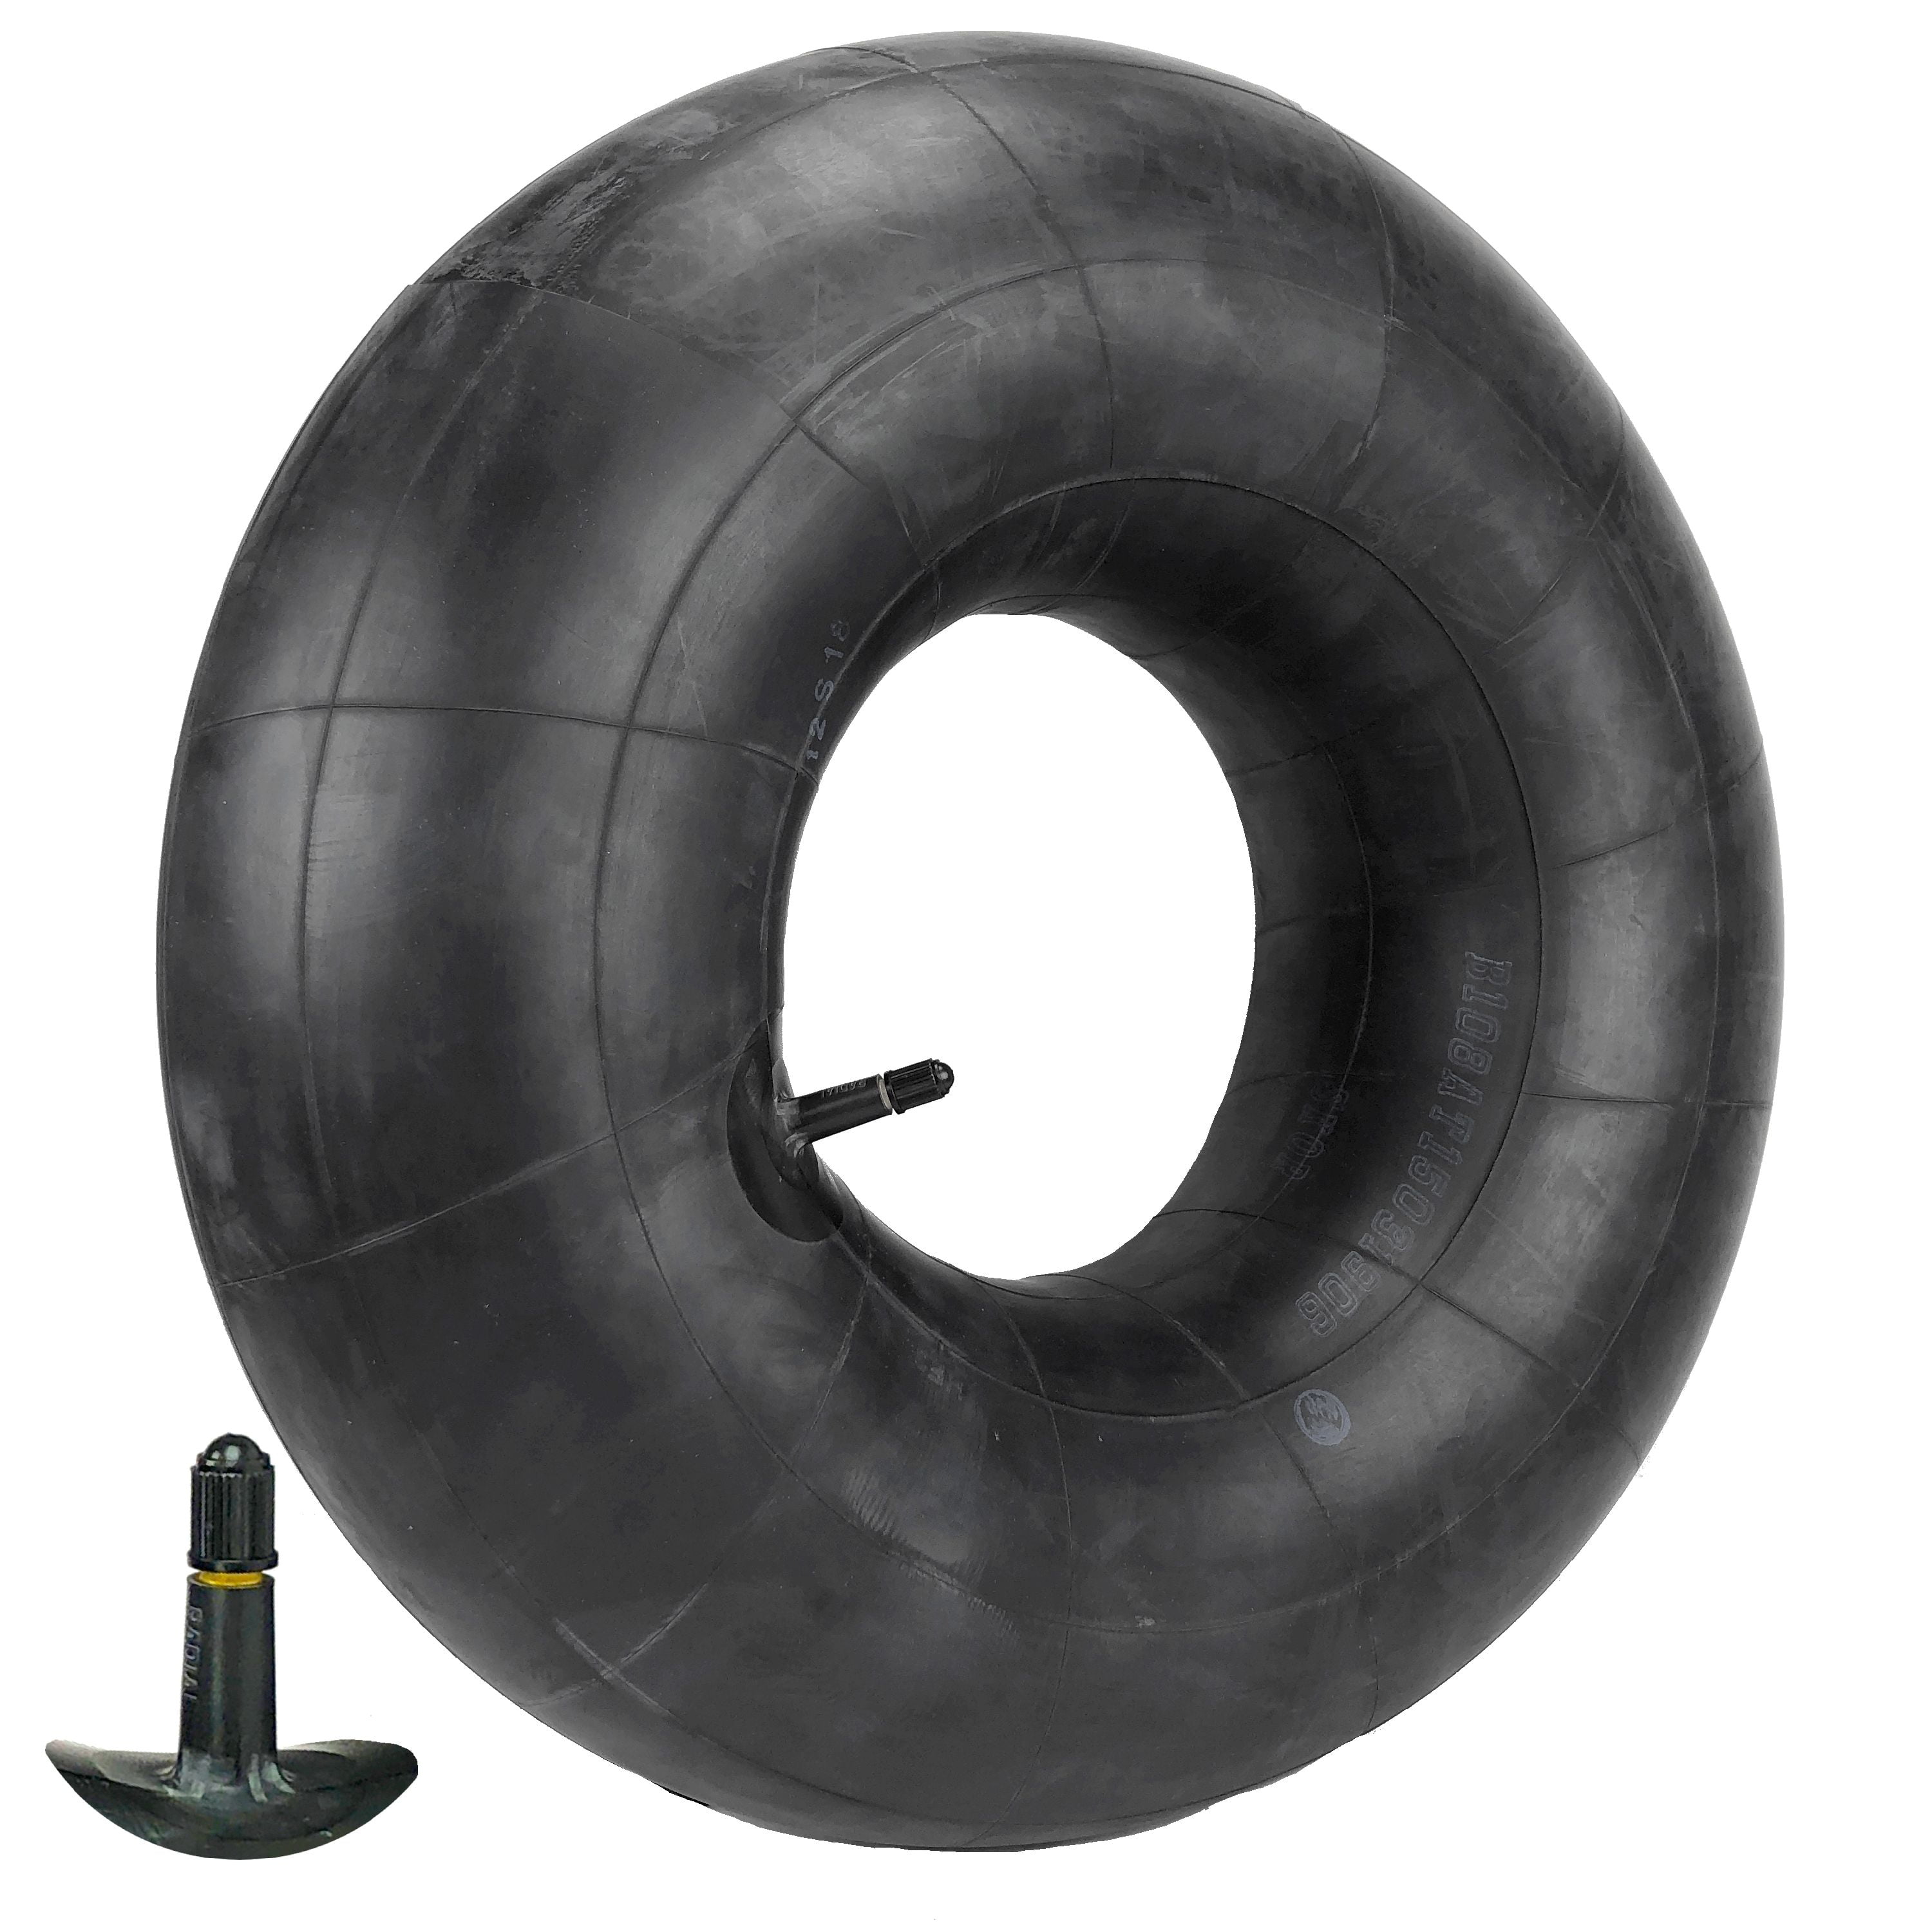 WHOLESALE LOT OF 10 FITS 15X6.00-6 15X600-6 Lawn Mower/Tractor Inner Tubes